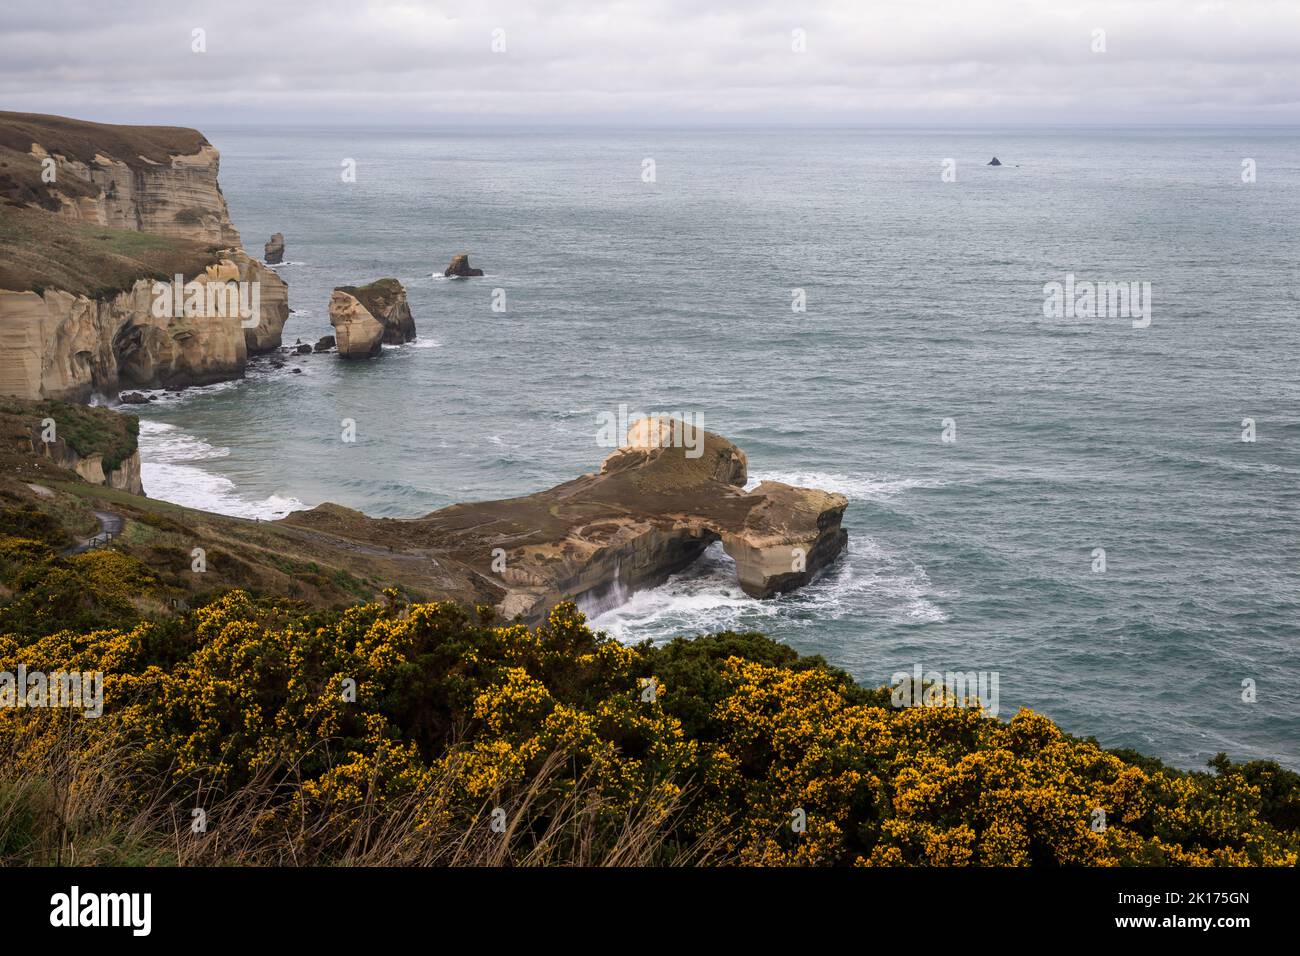 View of Tunnel Beach with yellow wild flowers in the foreground, Dunedin, New Zealand. Stock Photo